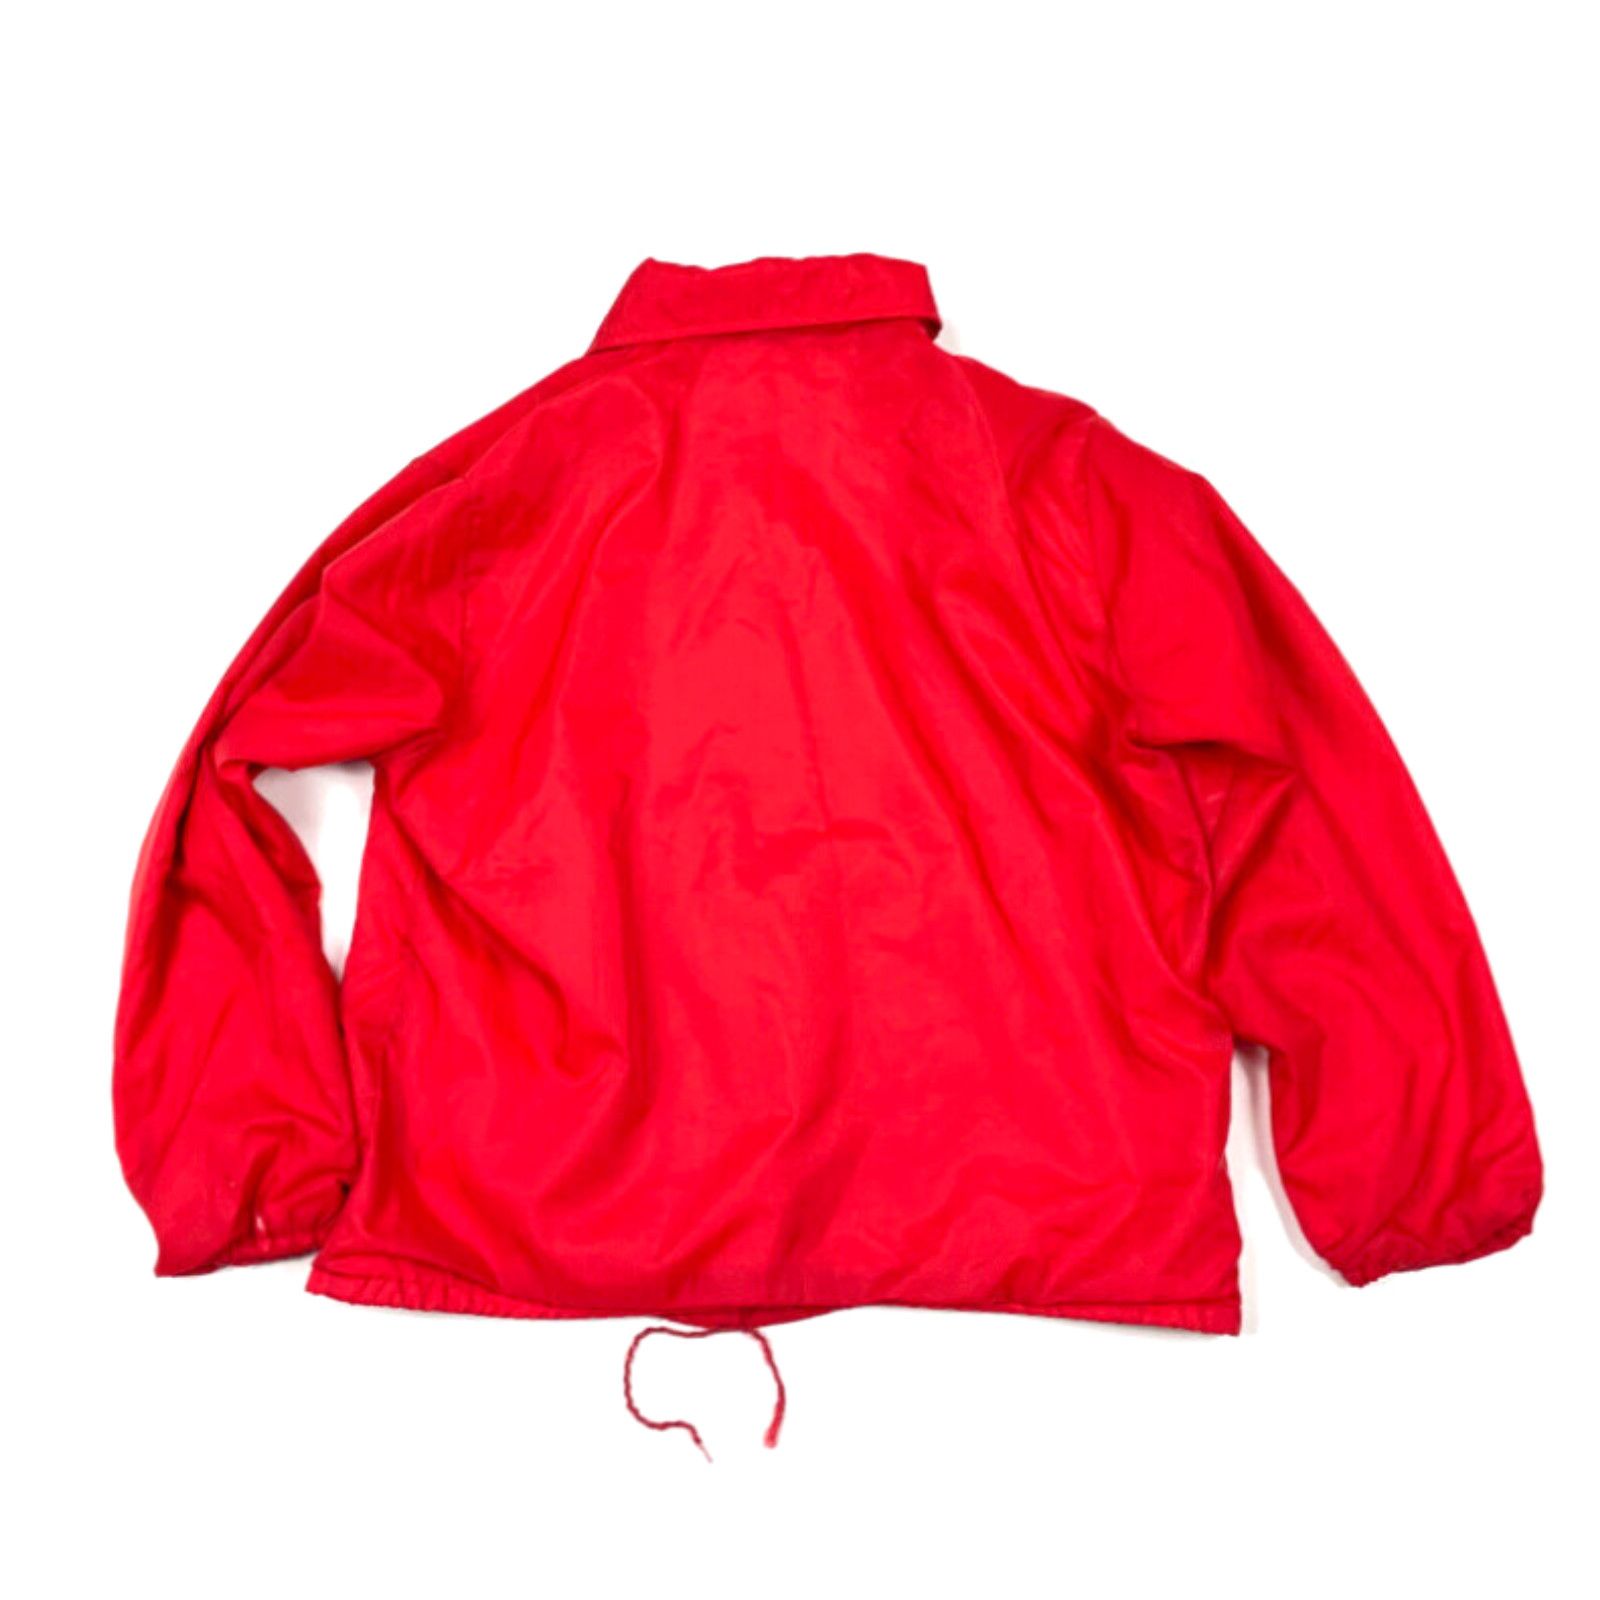 Vintage VTG 70s 80s MG JCPenney Red Nylon Windbreaker Jacket Lined Prep Classic Retro L Size L / US 10 / IT 46 - 2 Preview